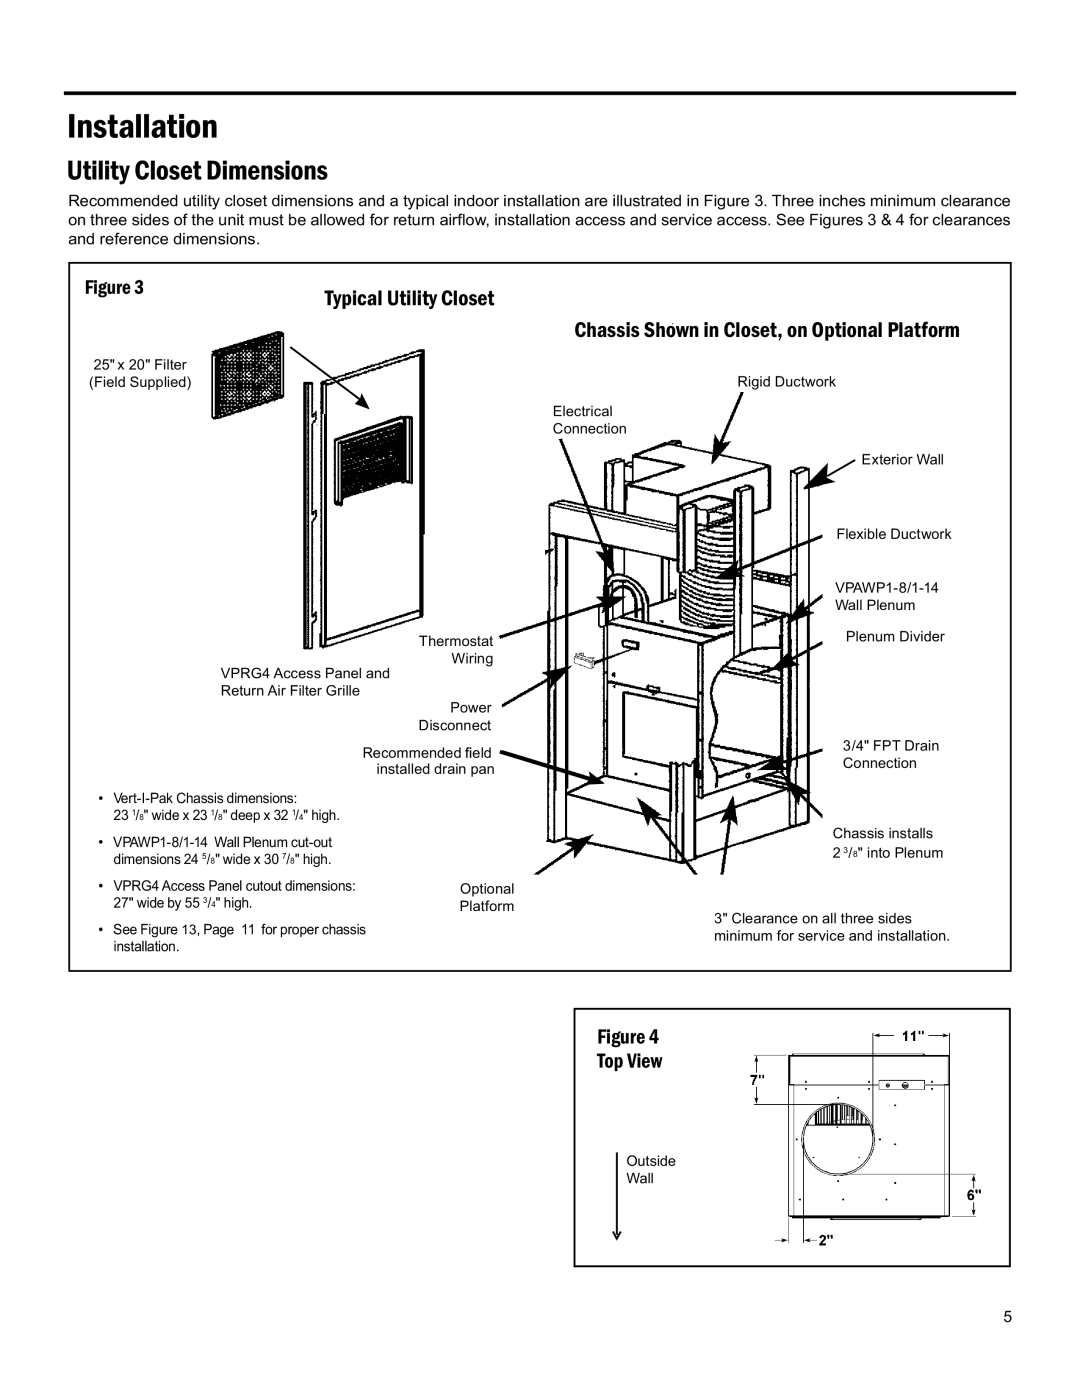 Friedrich 920-075-13 (1-11) operation manual Installation, Utility Closet Dimensions, Typical Utility Closet, Top View 